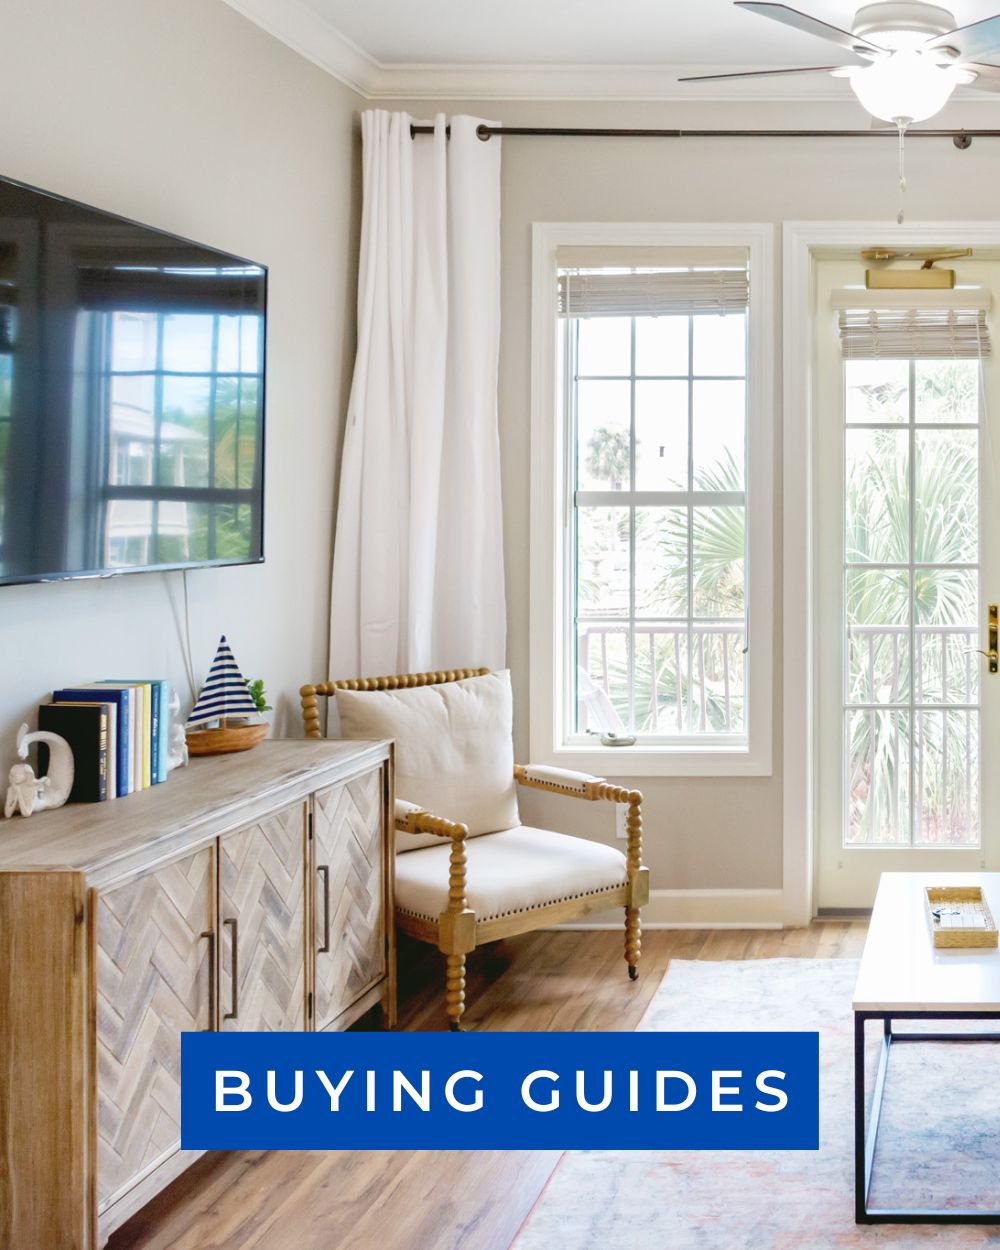 Airbnb Hosting Guide Buying Guides